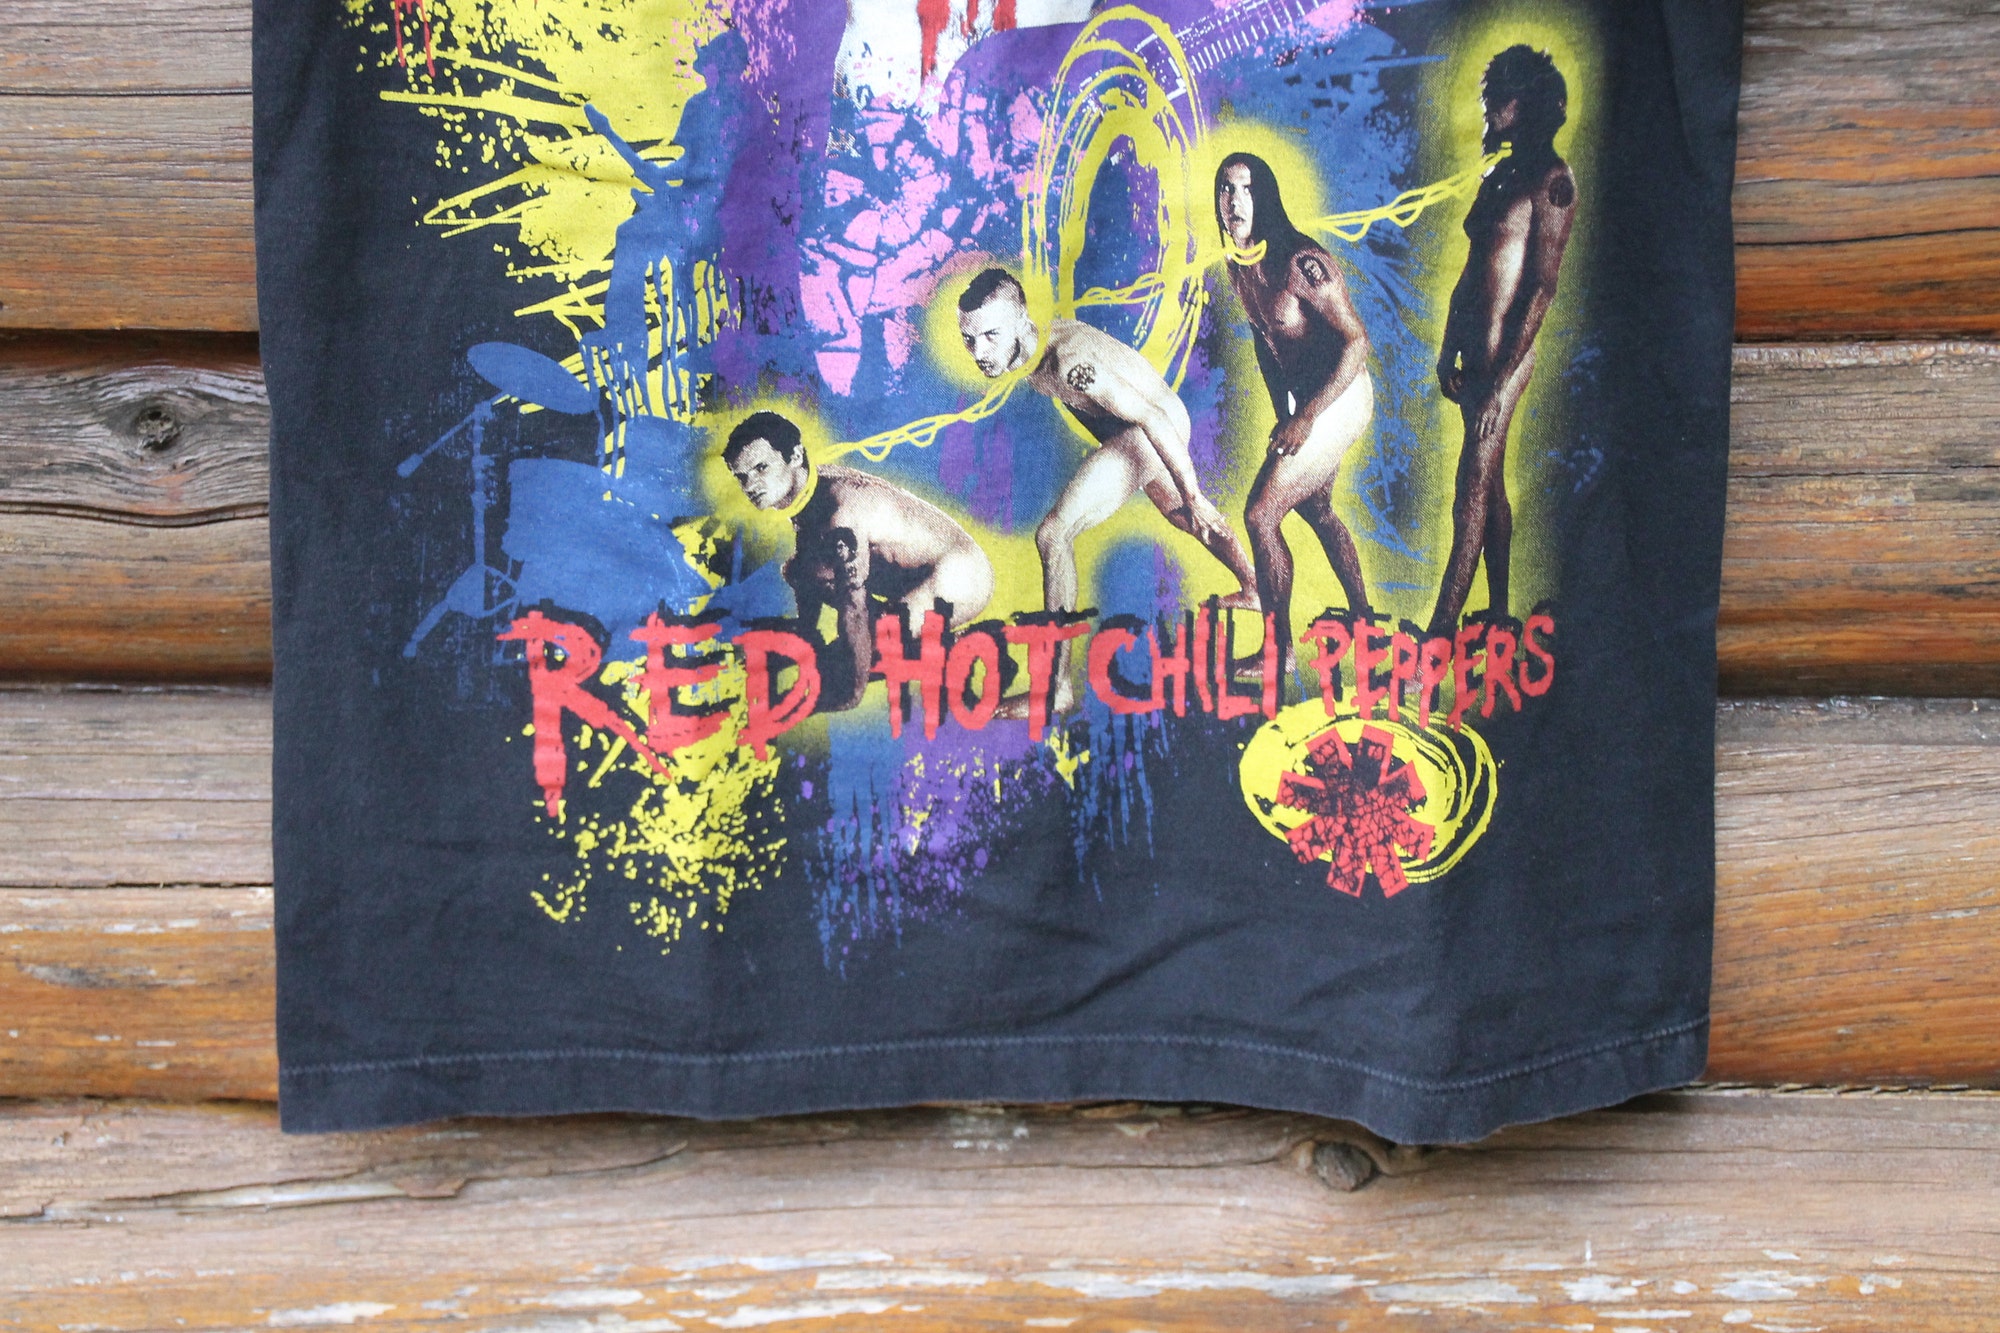 Vintage Red Hot Chili Peppers RHCP Rock Band T-Shirt